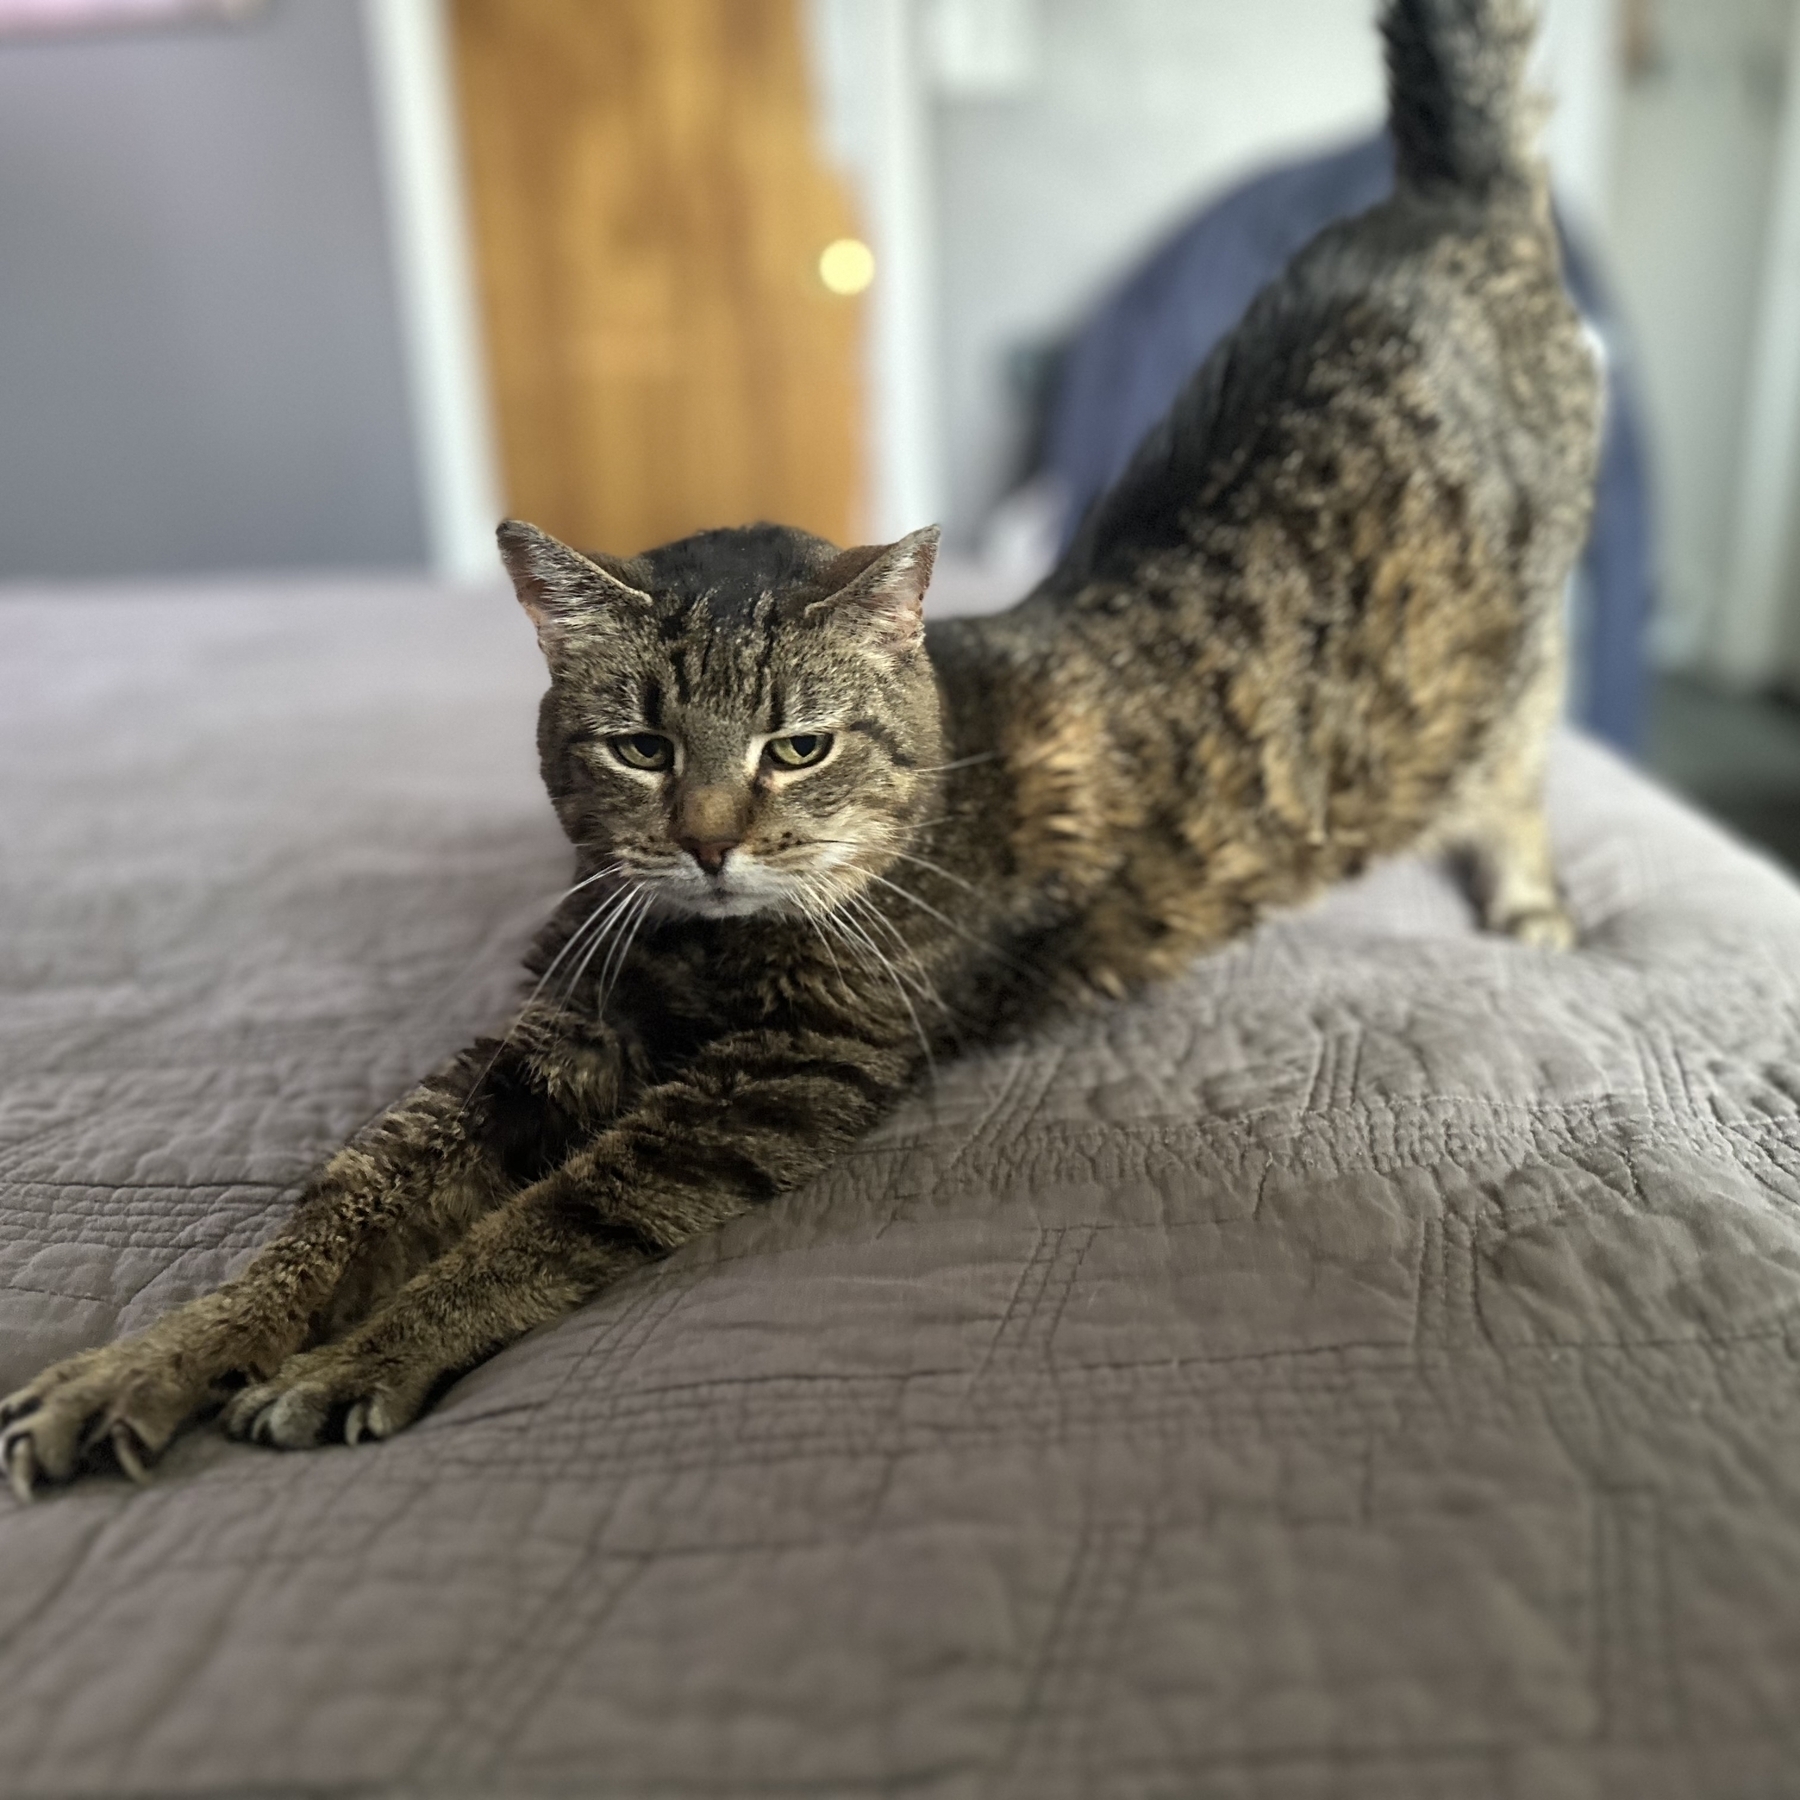 A cat is stretching on a bed.